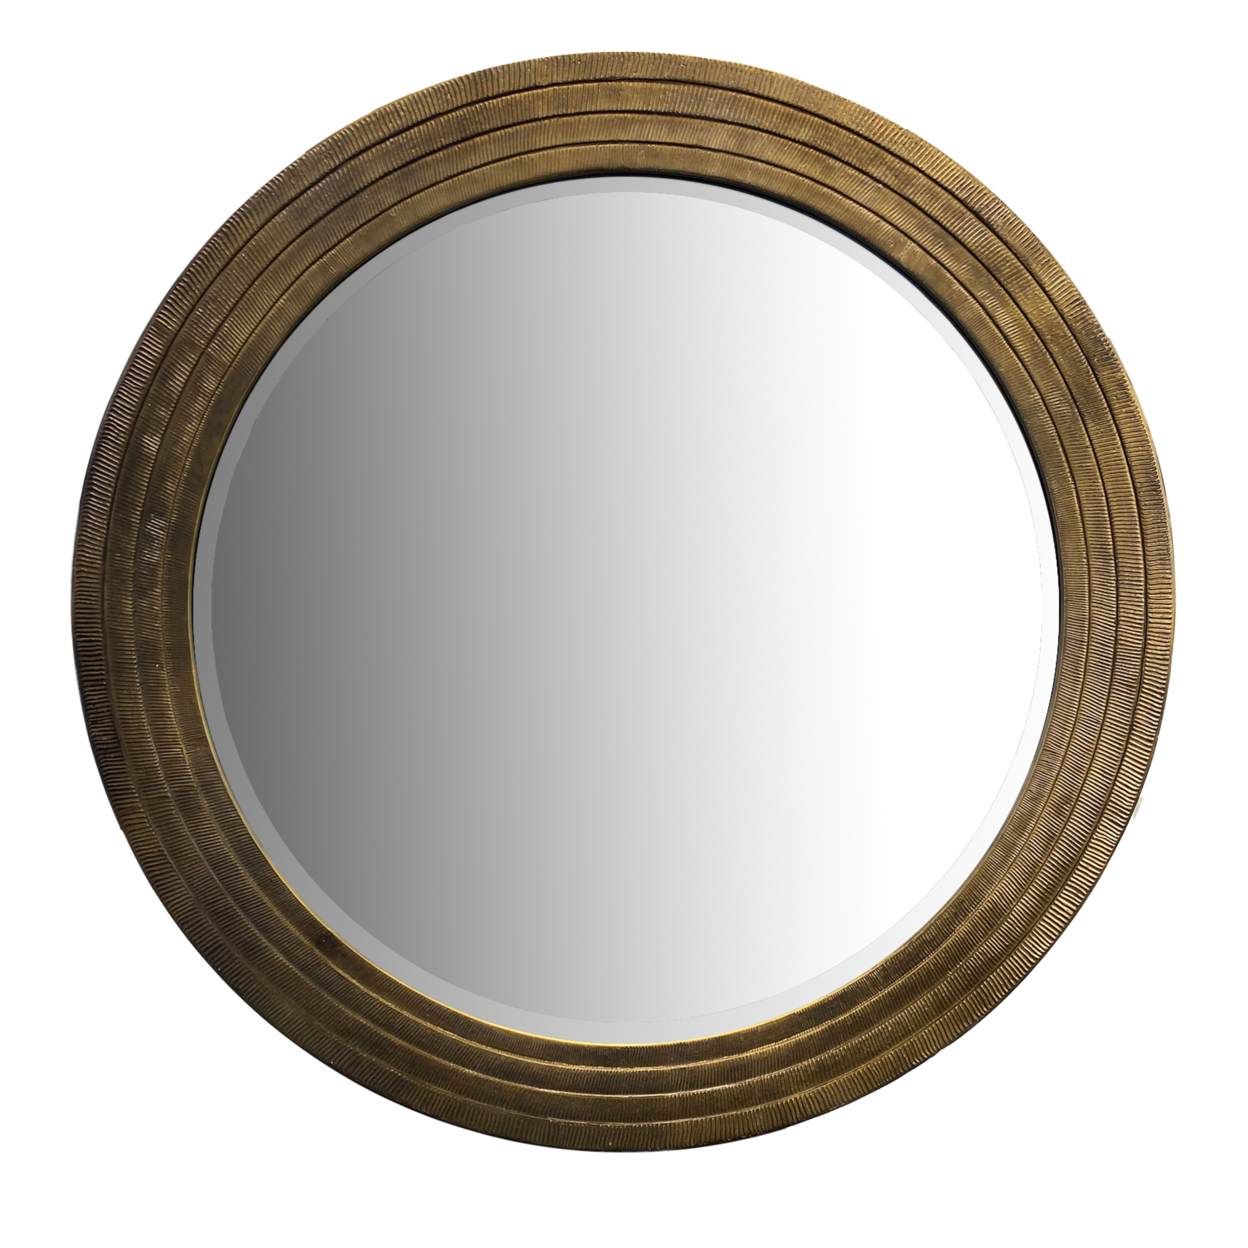 Round Layered Wooden Frame Decor Wall Mirror With Hand Carved Texture, Brown- Saltoro Sherpi